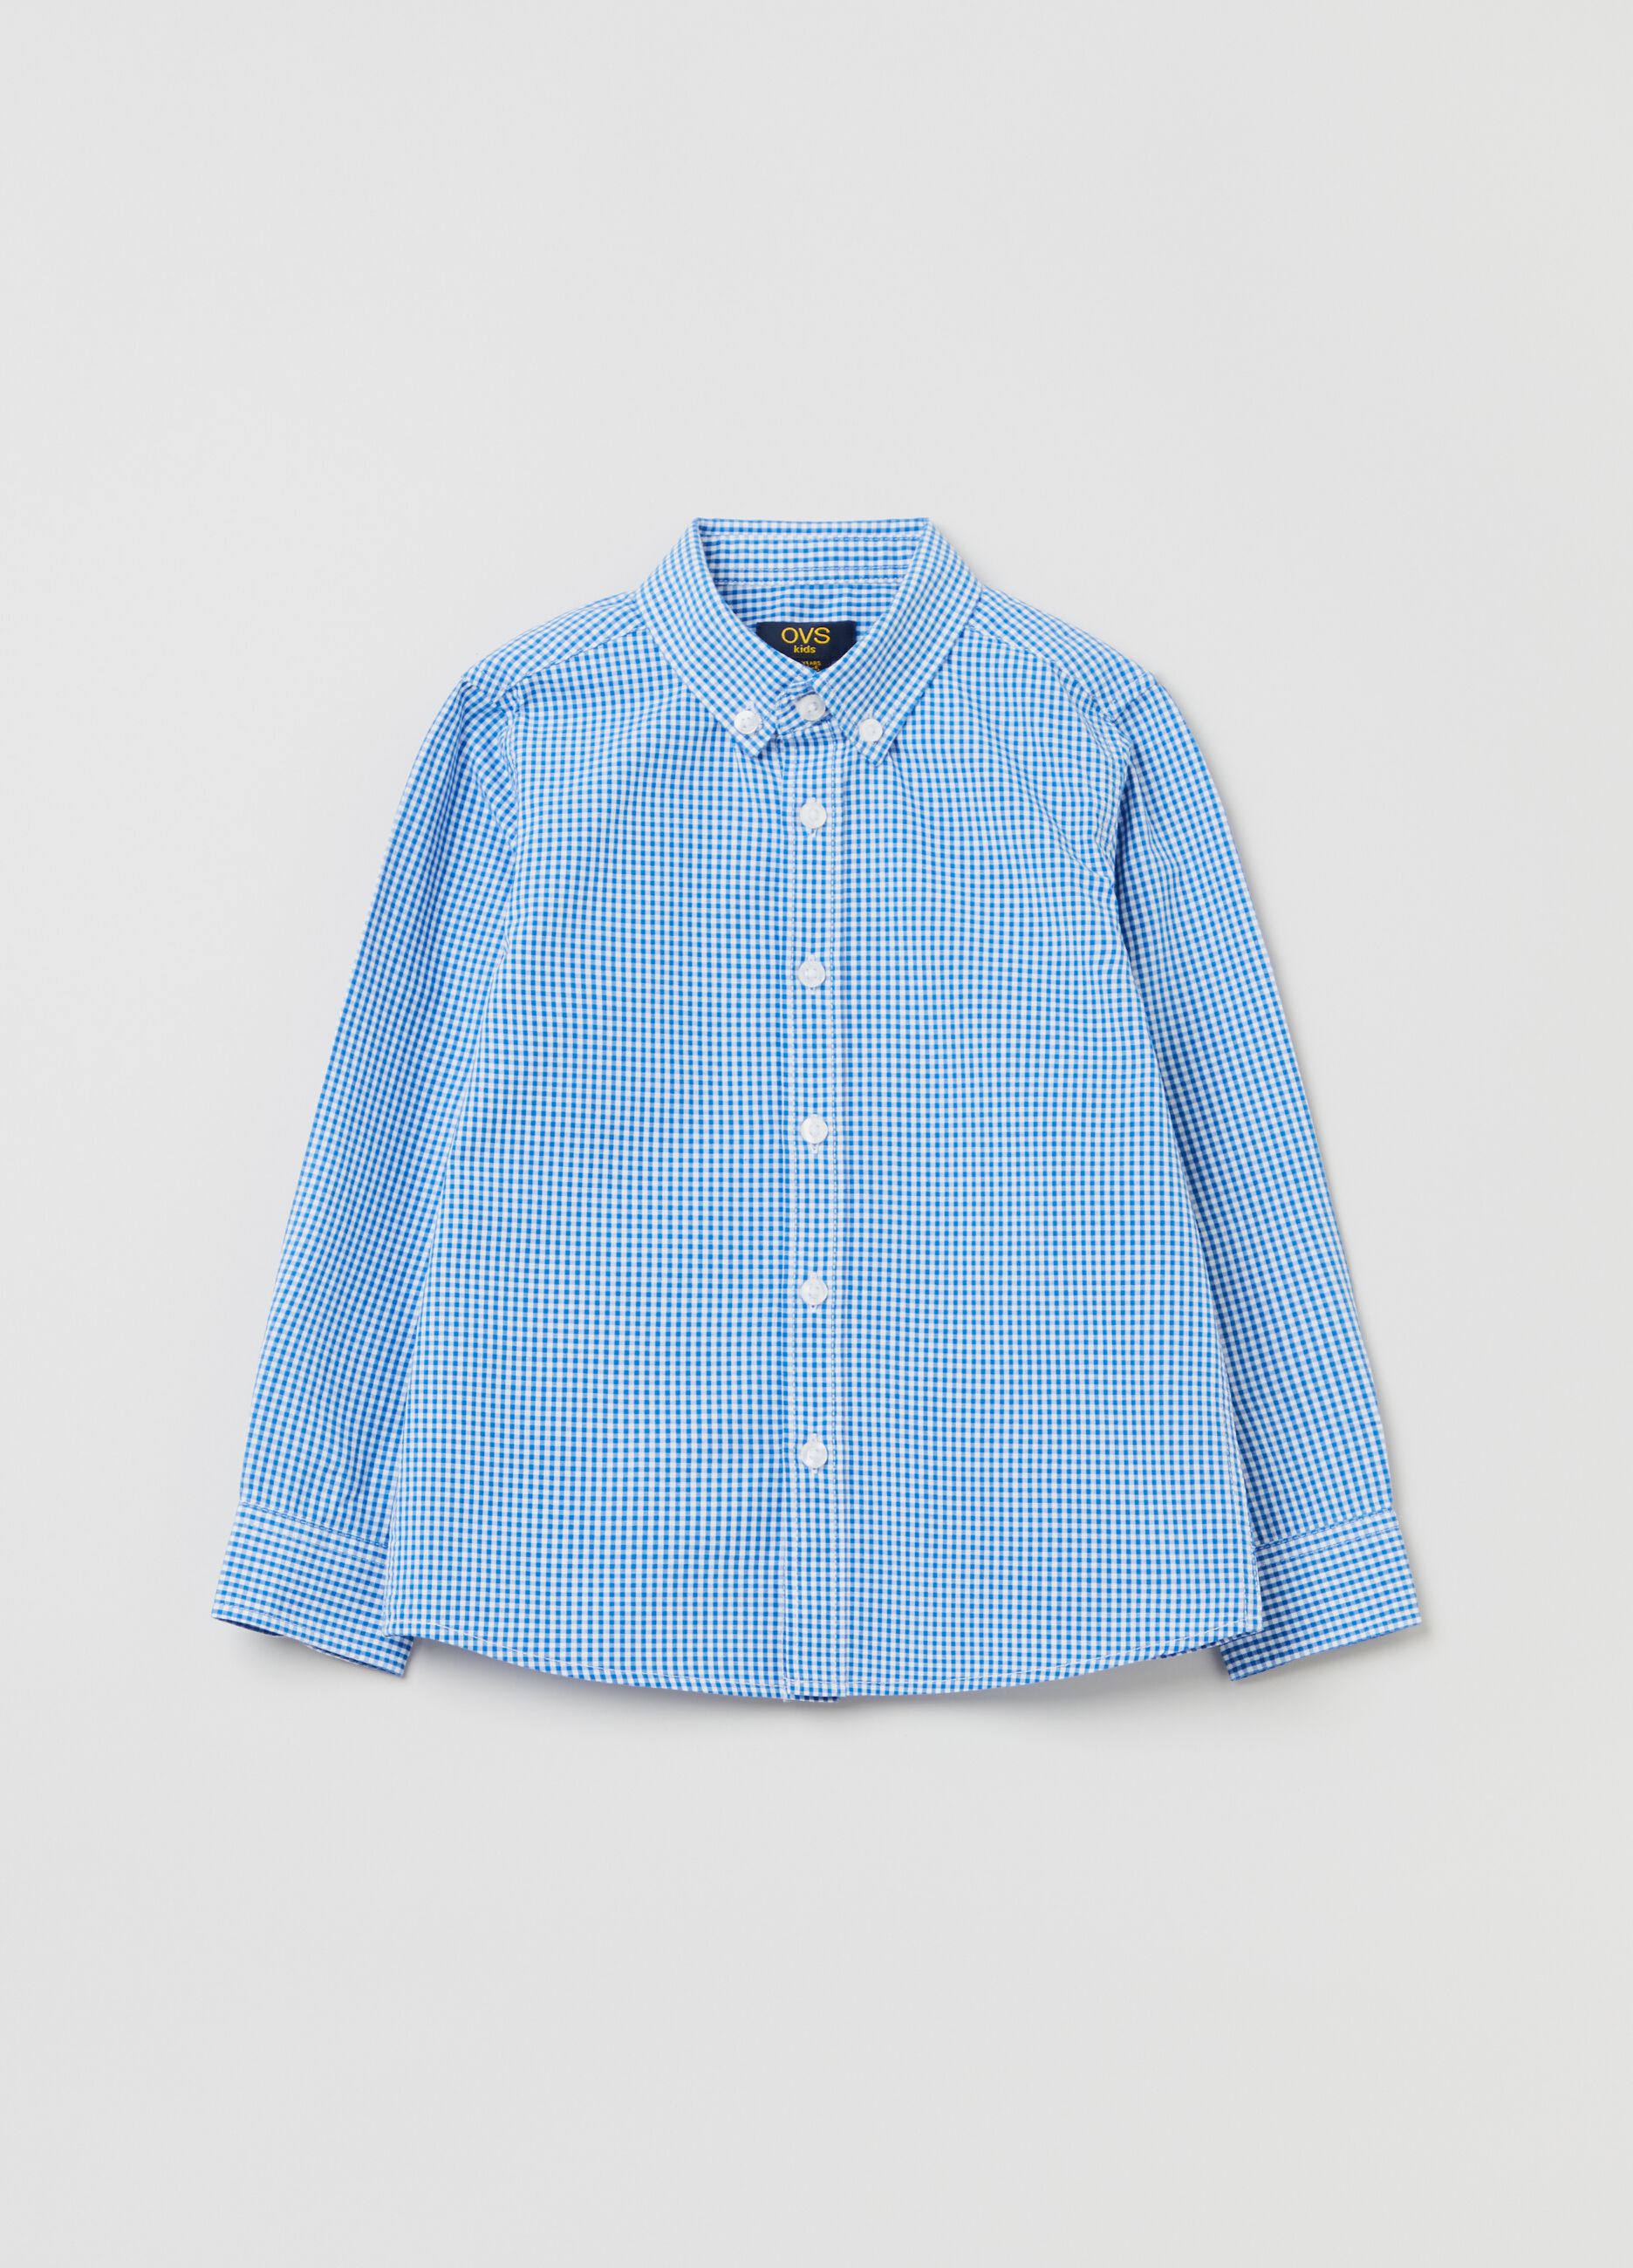 Button-down shirt in gingham cotton